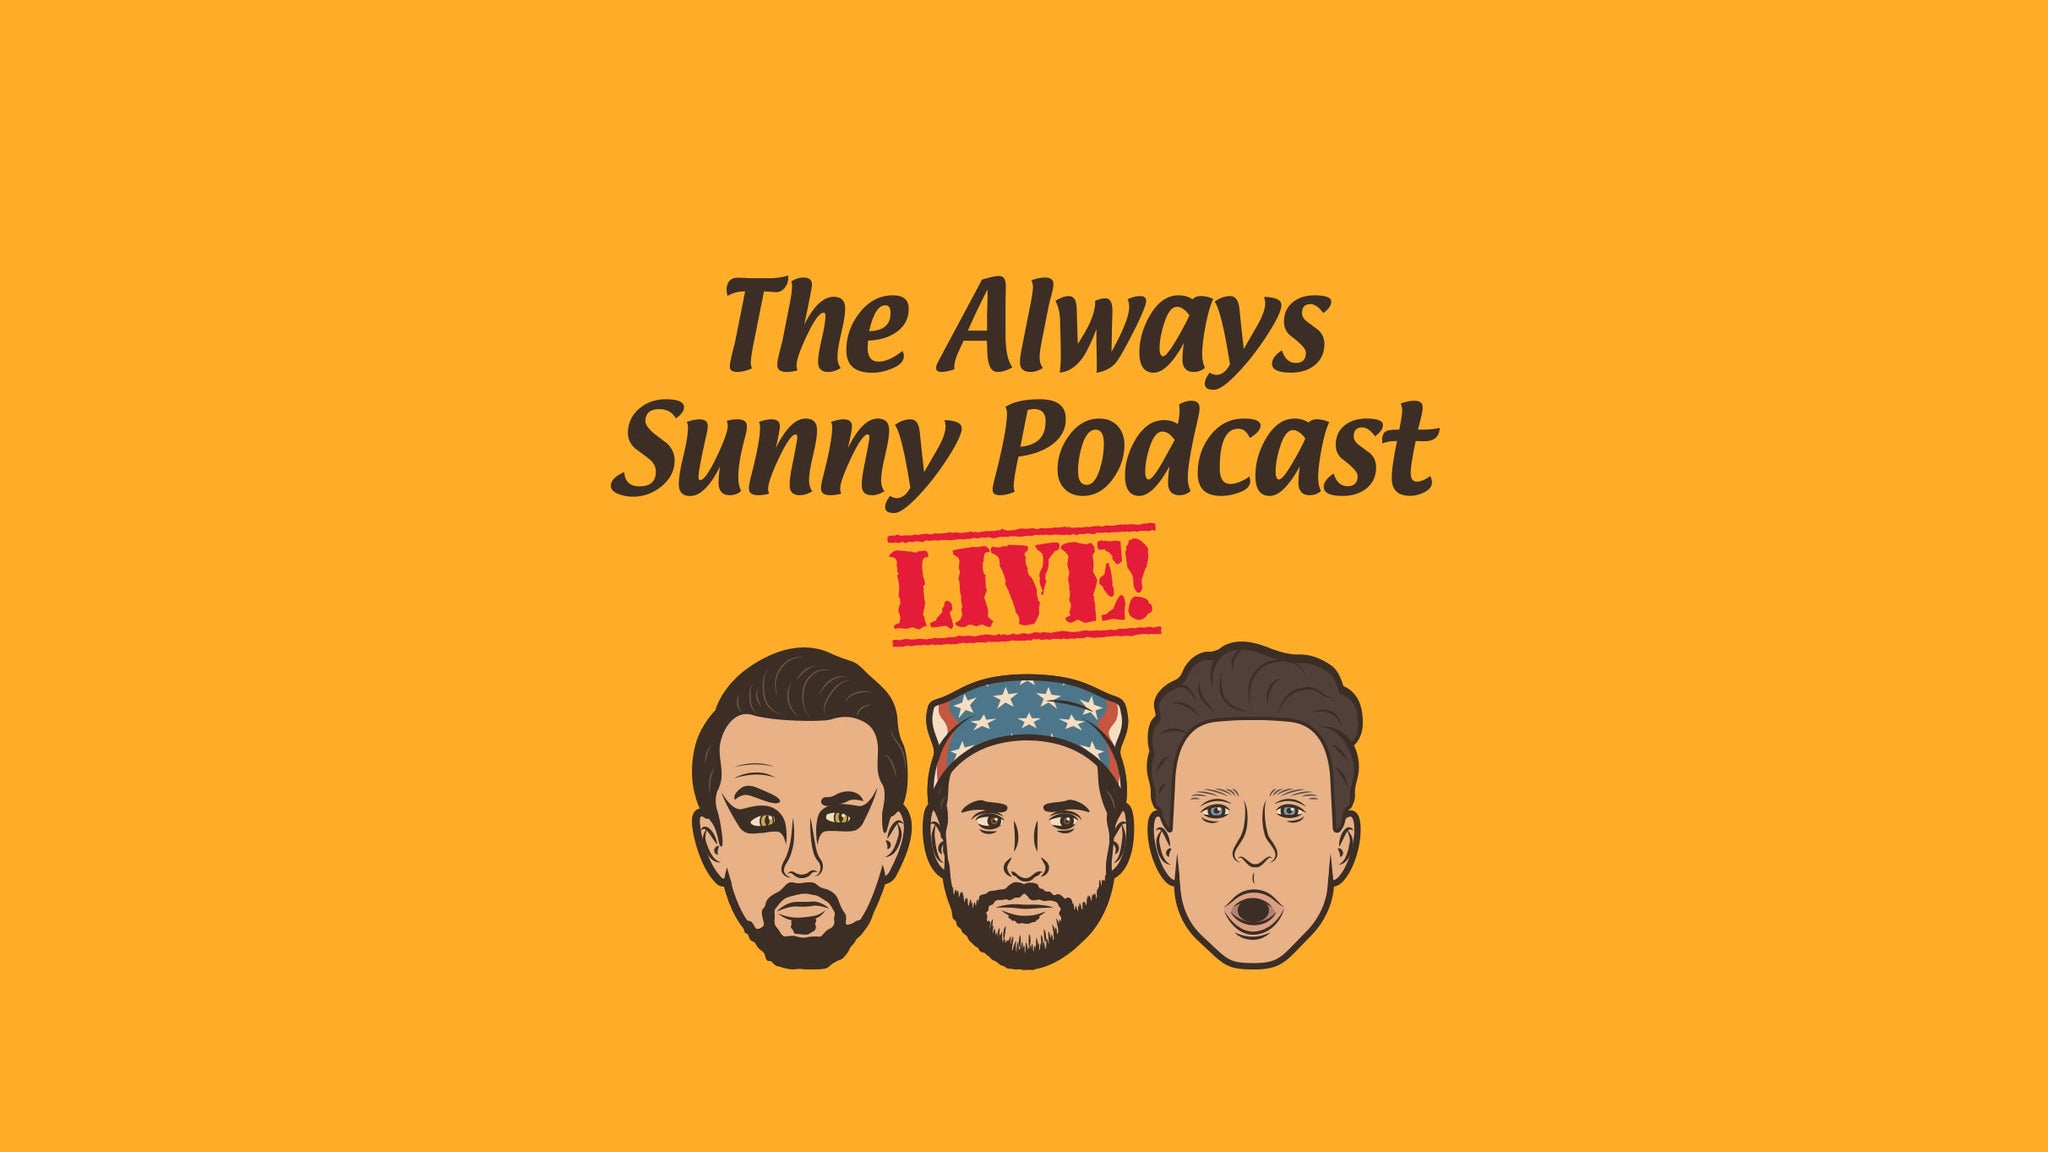 Four Walls Presents The Always Sunny Podcast LIVE! presale code for show tickets in New York, NY (Radio City Music Hall)